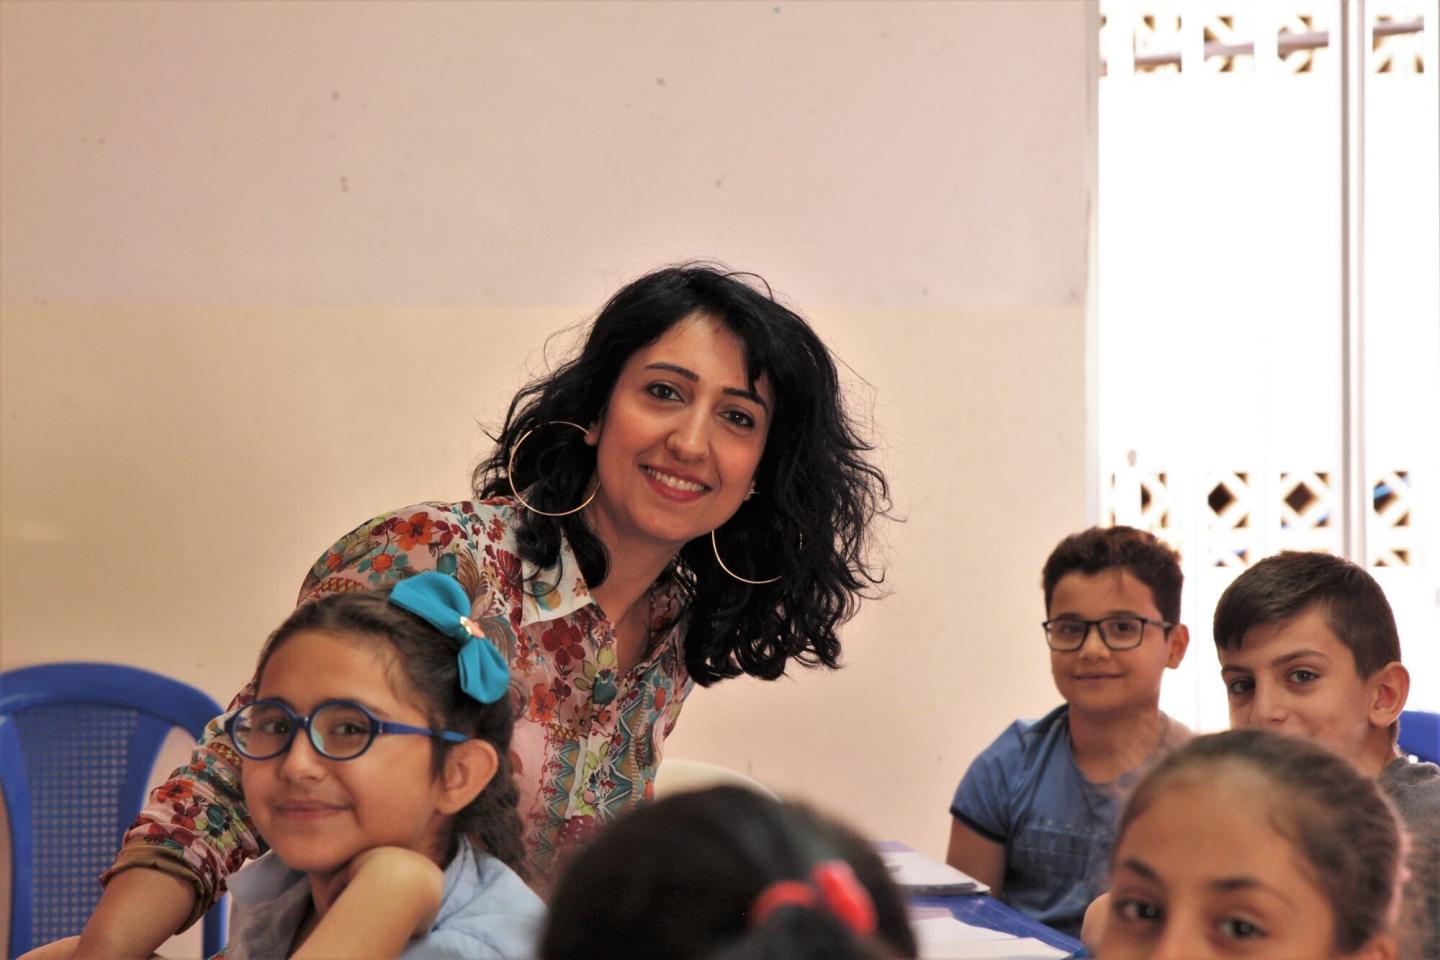 A teach smiles at the camera while leaning over a group of students